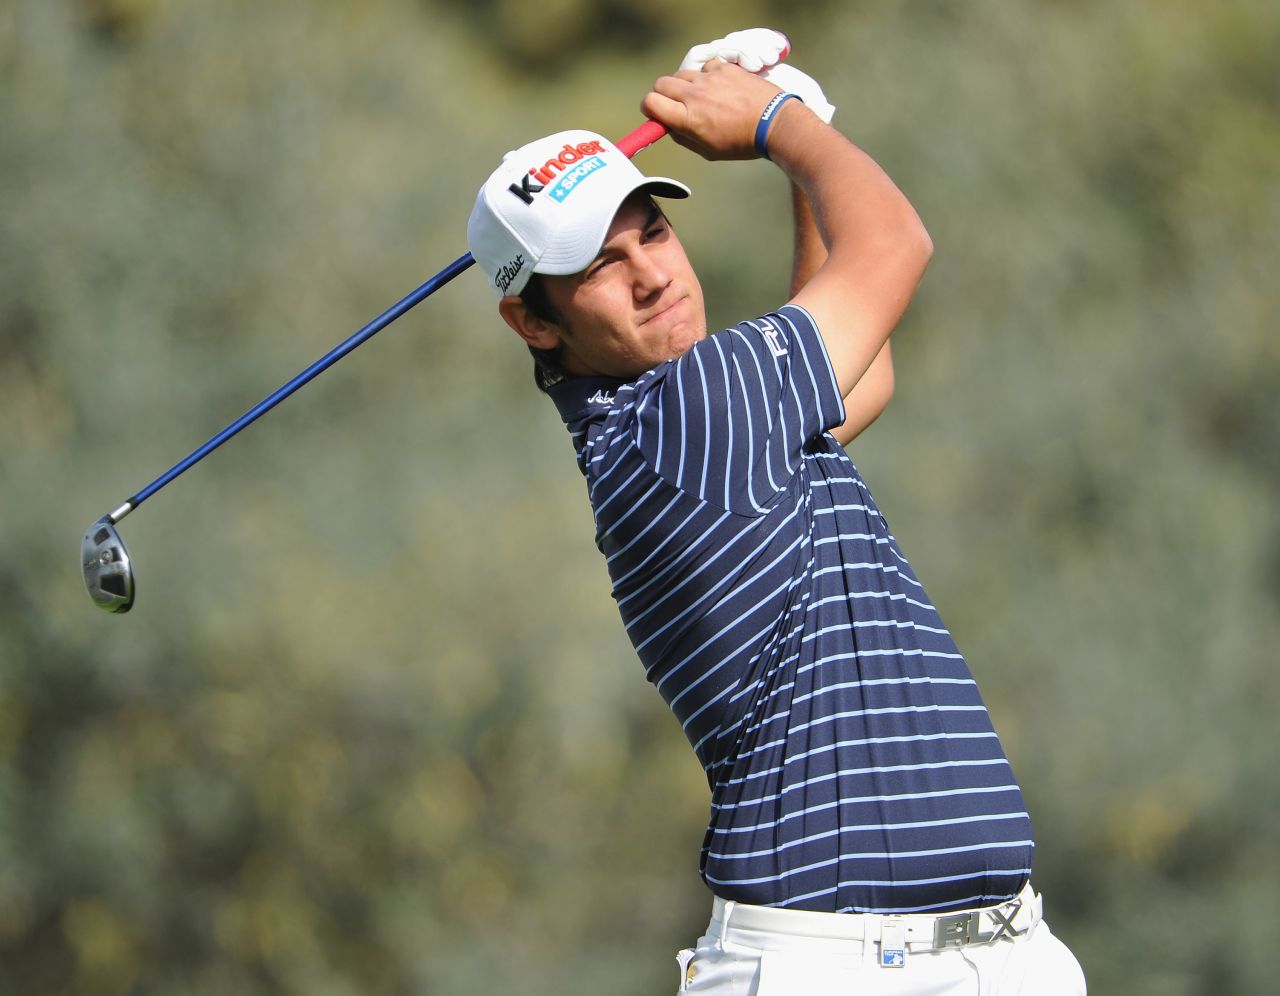 Italian teenager Matteo Manassero stormed to the top of the leaderboard on day one of the Andalucia Open, Spain on Thursday.